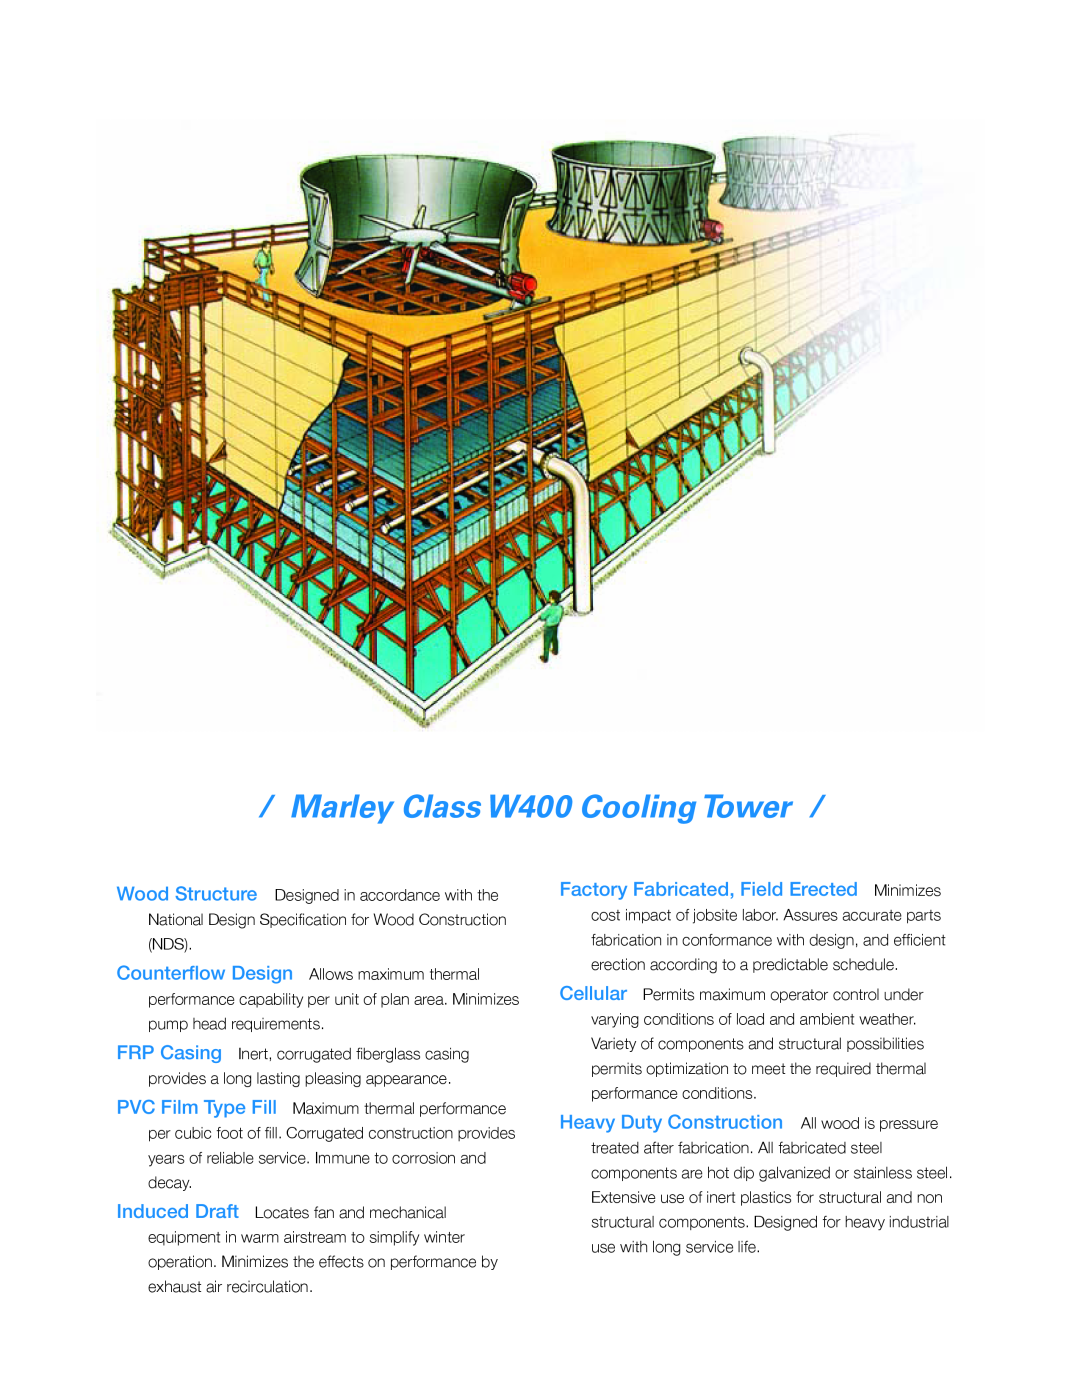 SPX Cooling Technologies manual Marley Class W400 Cooling Tower 